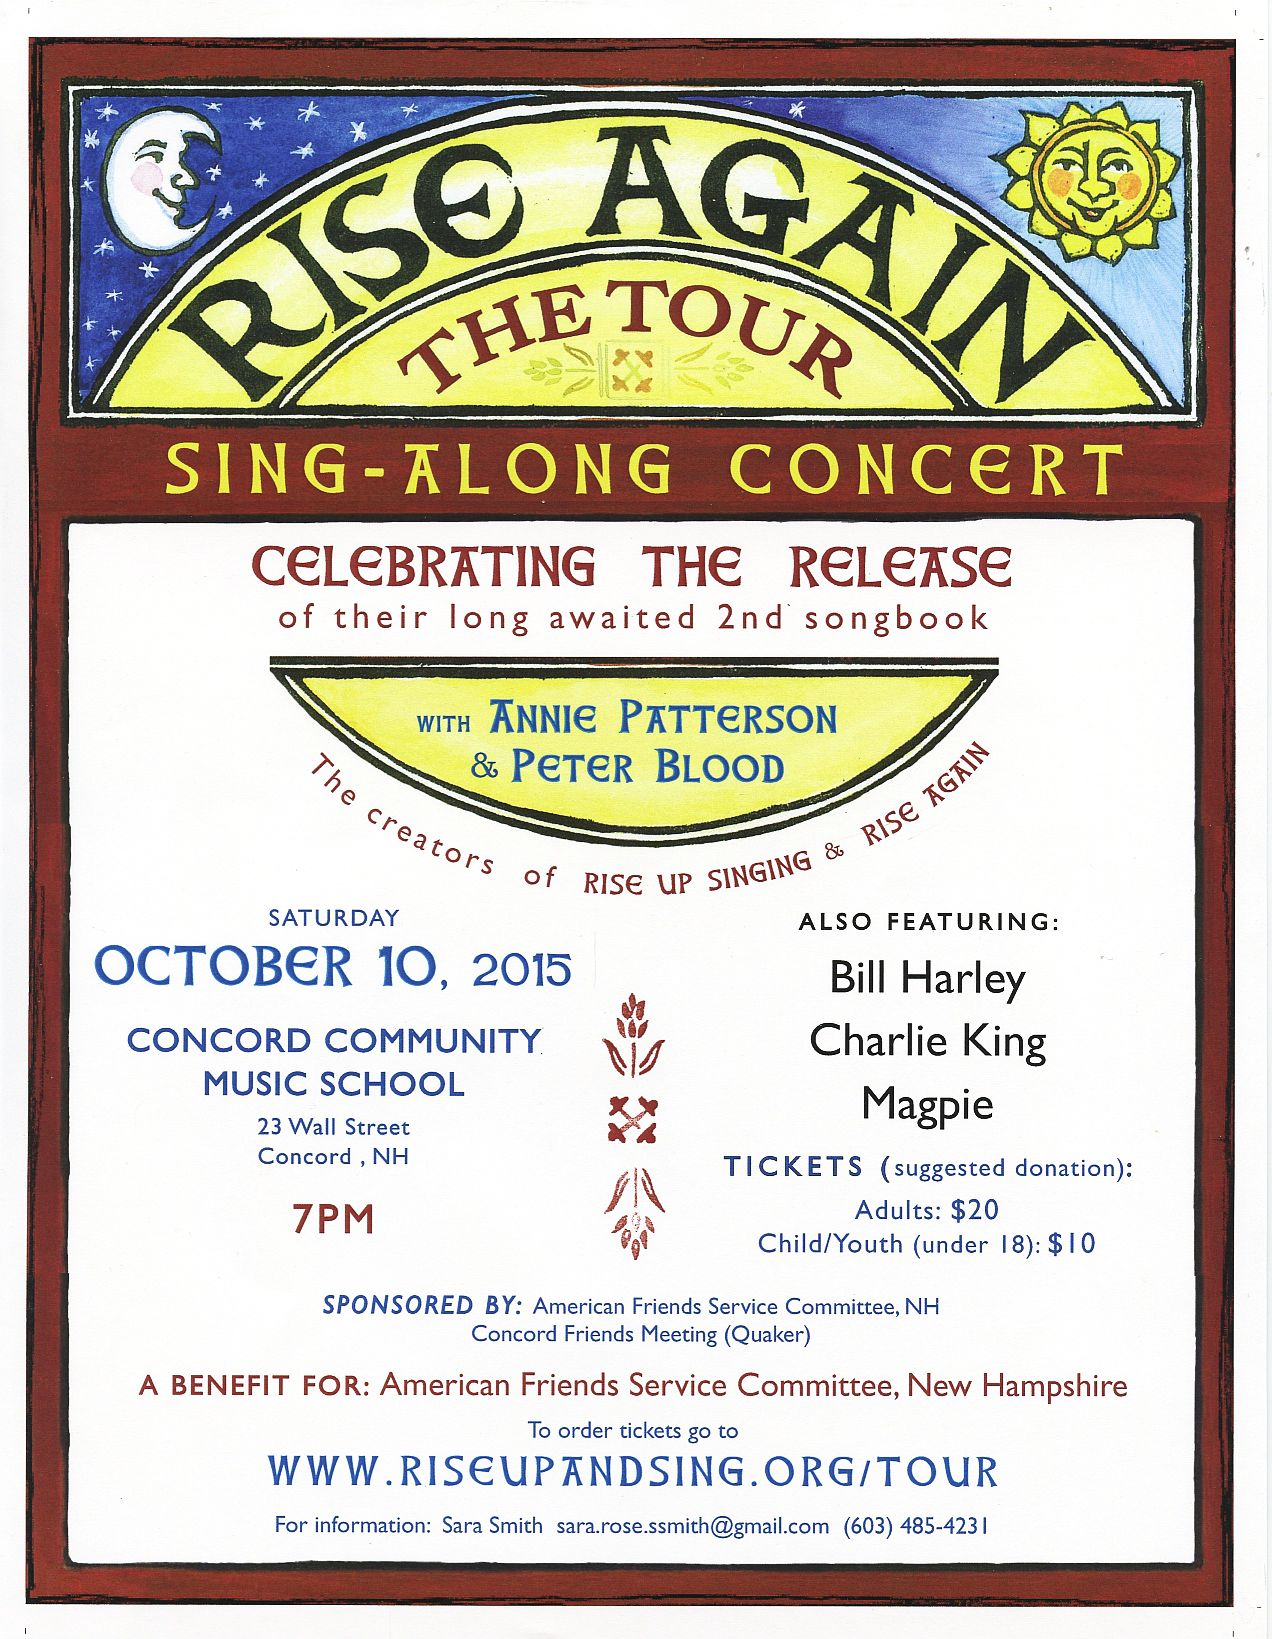 poster for Rise Again Concert in Concord, NH, USA on October 10, 2015